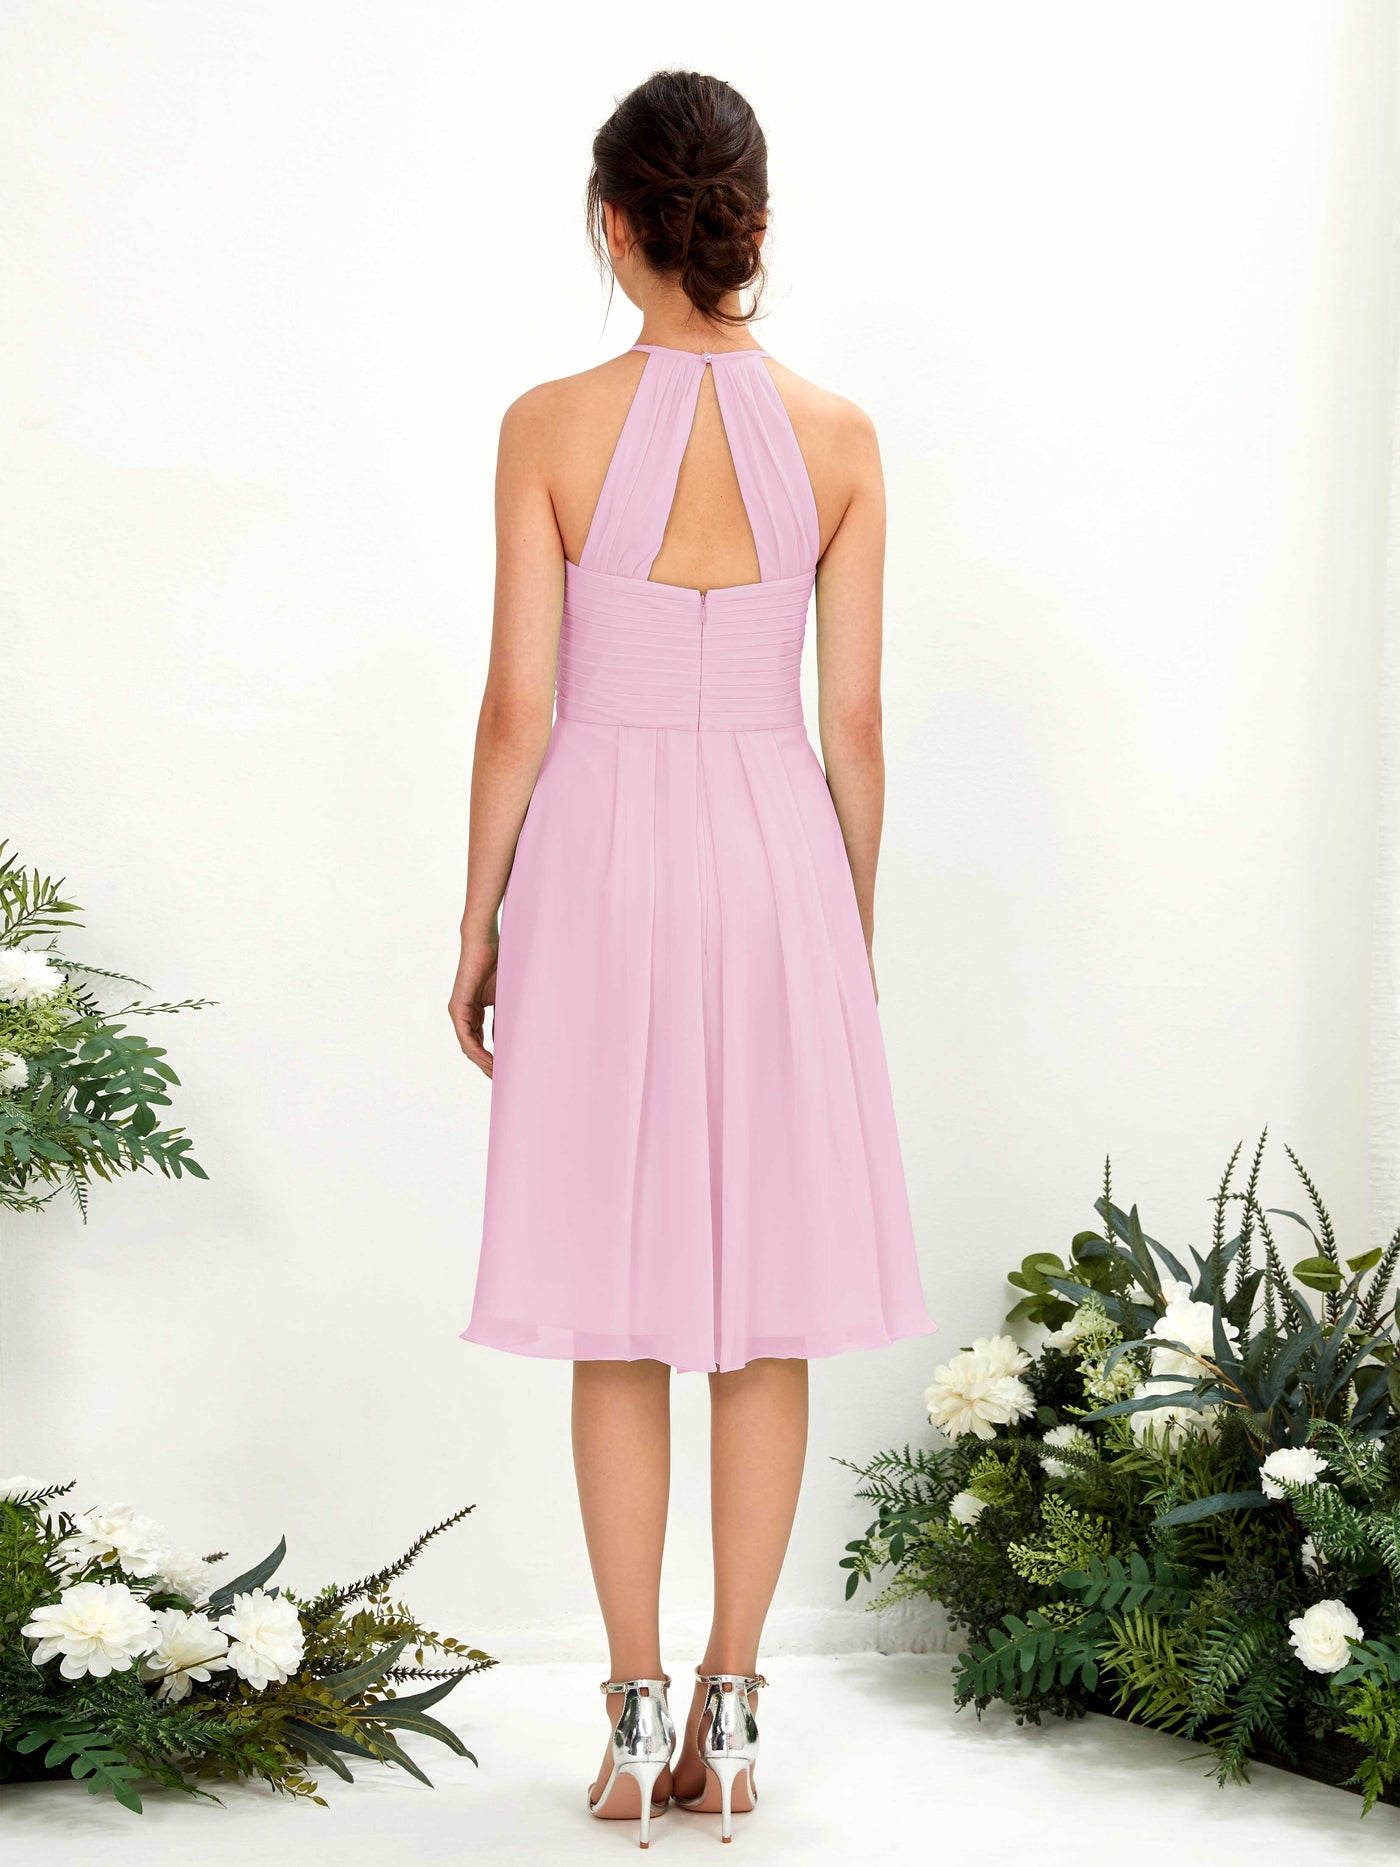 Candy Pink Bridesmaid Dresses Bridesmaid Dress A-line Chiffon Halter Knee Length Sleeveless Wedding Party Dress (81220439)#color_candy-pink